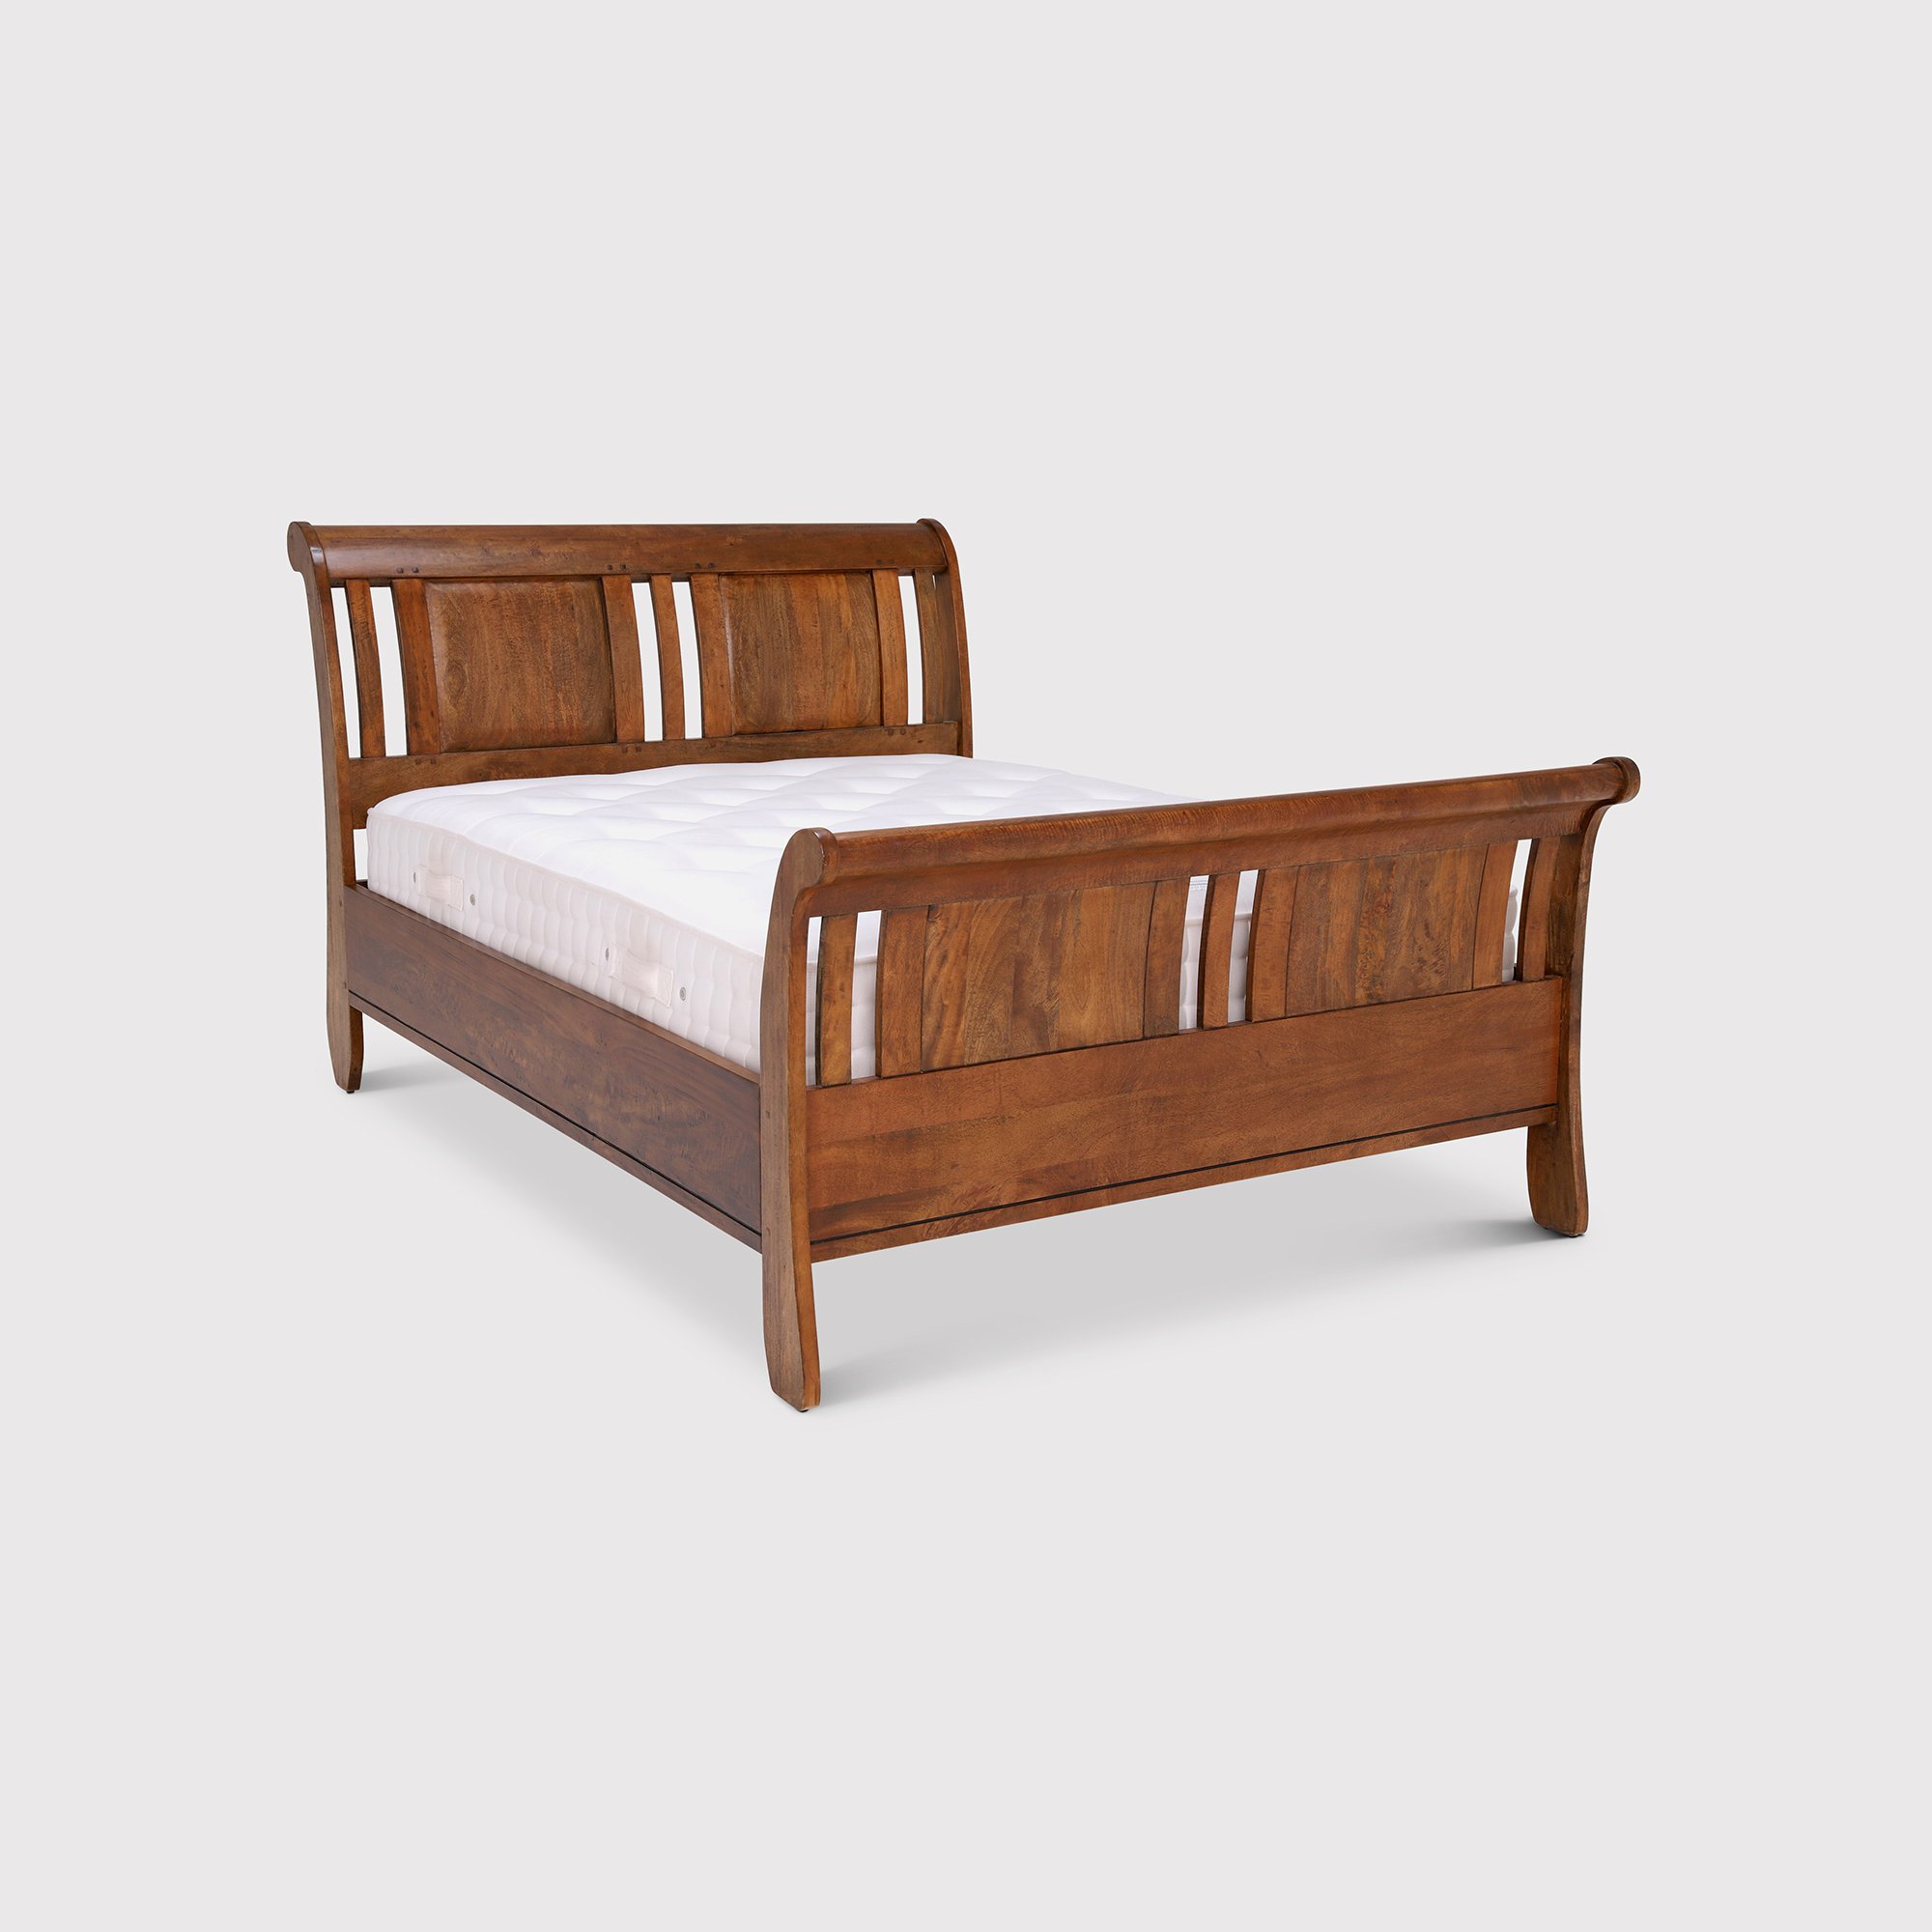 New Frontier 180cm Sleigh Bed, Wood | Super King | Barker & Stonehouse